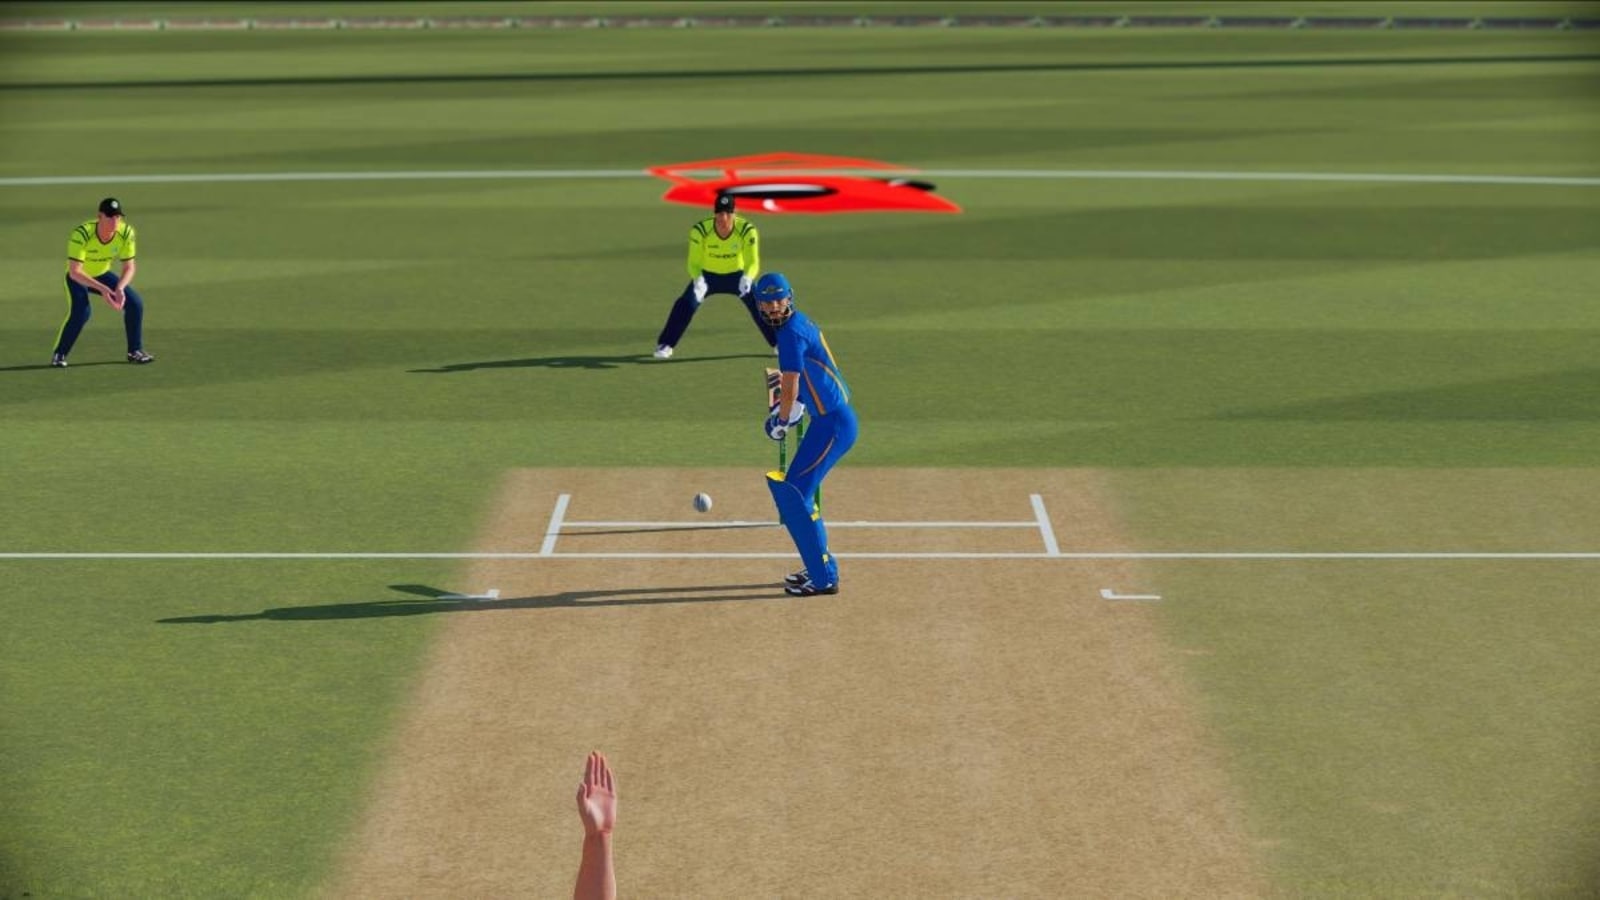 Cricket 22 review: Mega to play but a disappointing upgrade | Gaming Reviews